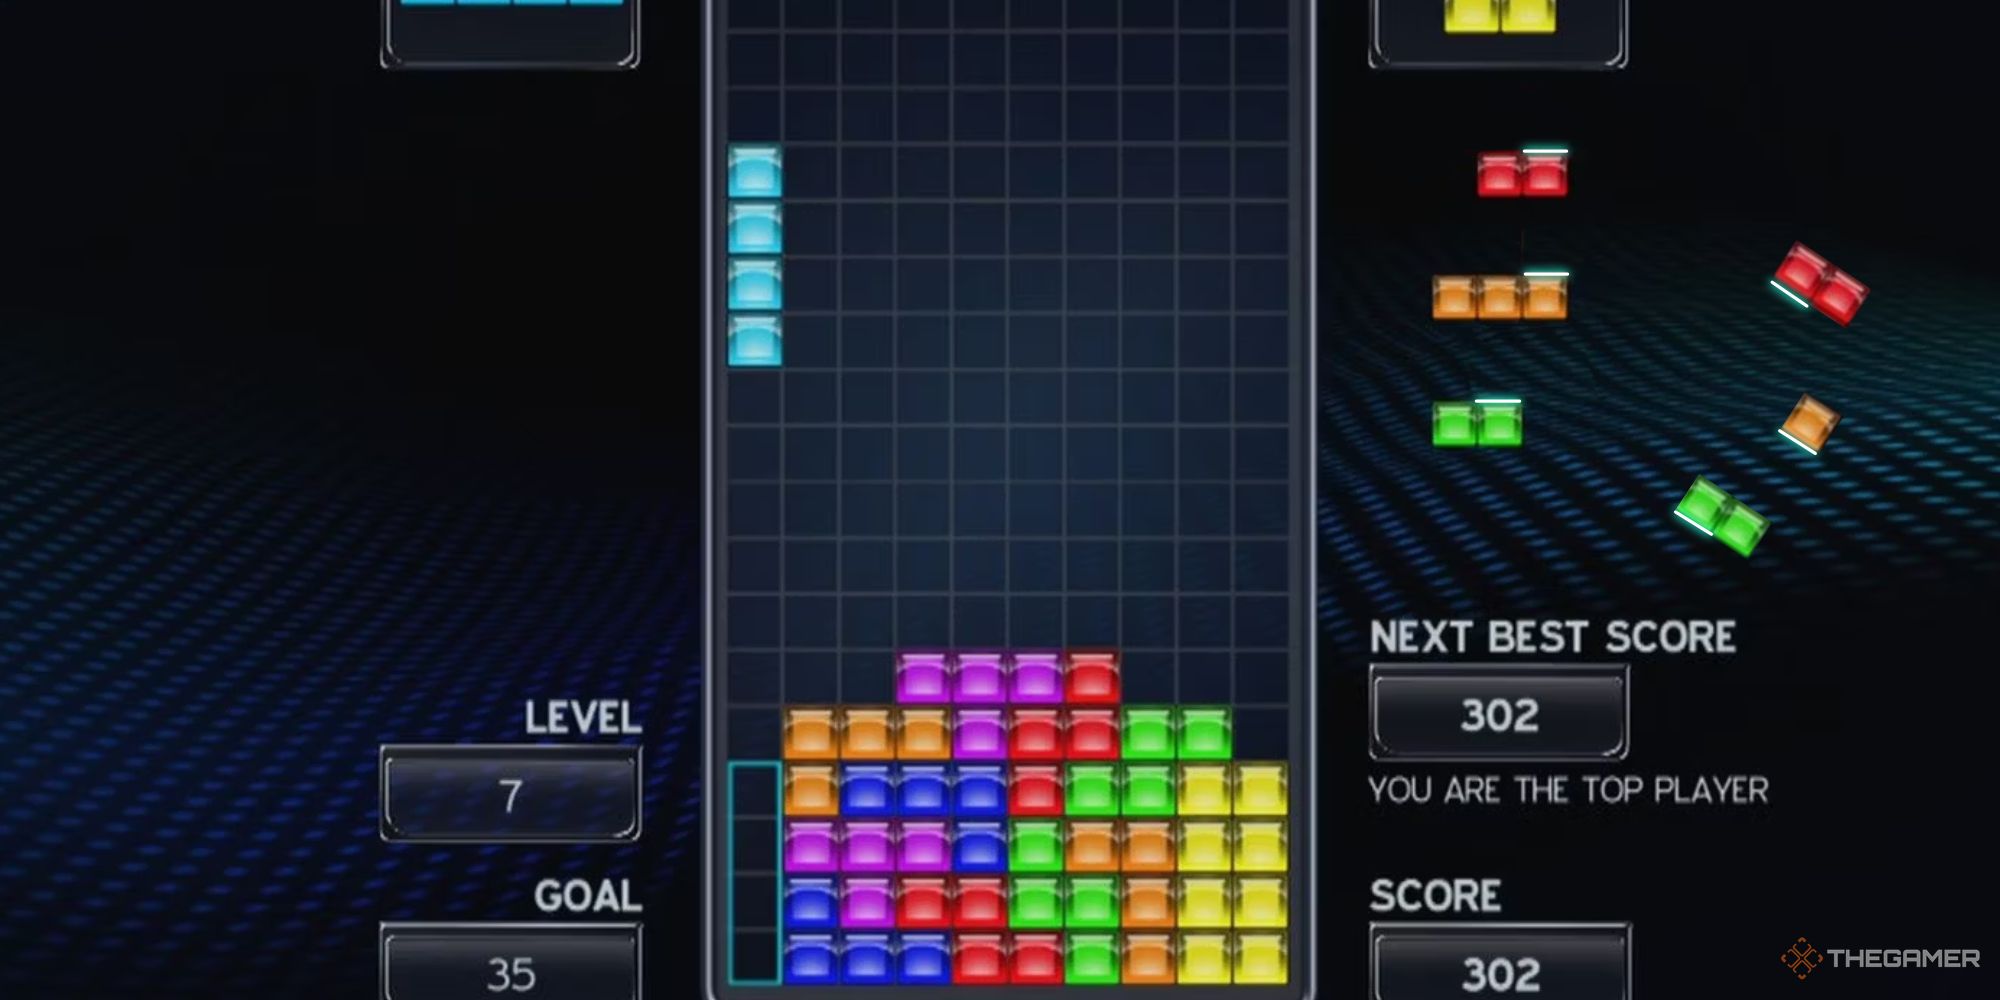 Tetris but the upcoming pieces are cut to be flat